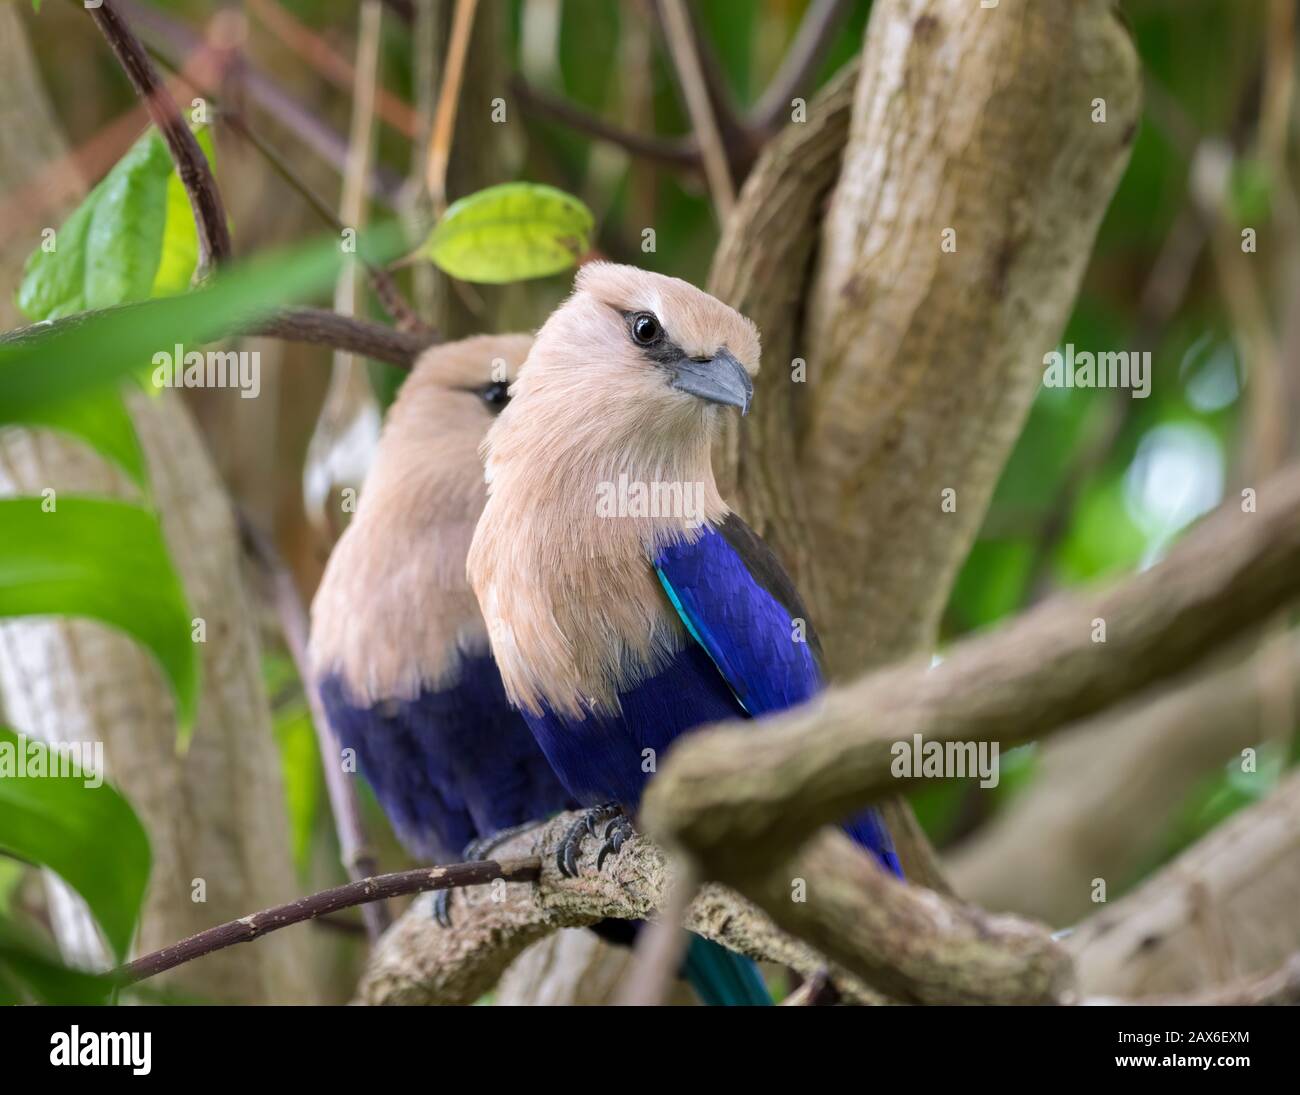 Couple Of Blue-bellied Rollers (Coracias cyanogaster) Perched On Tree Branch Stock Photo